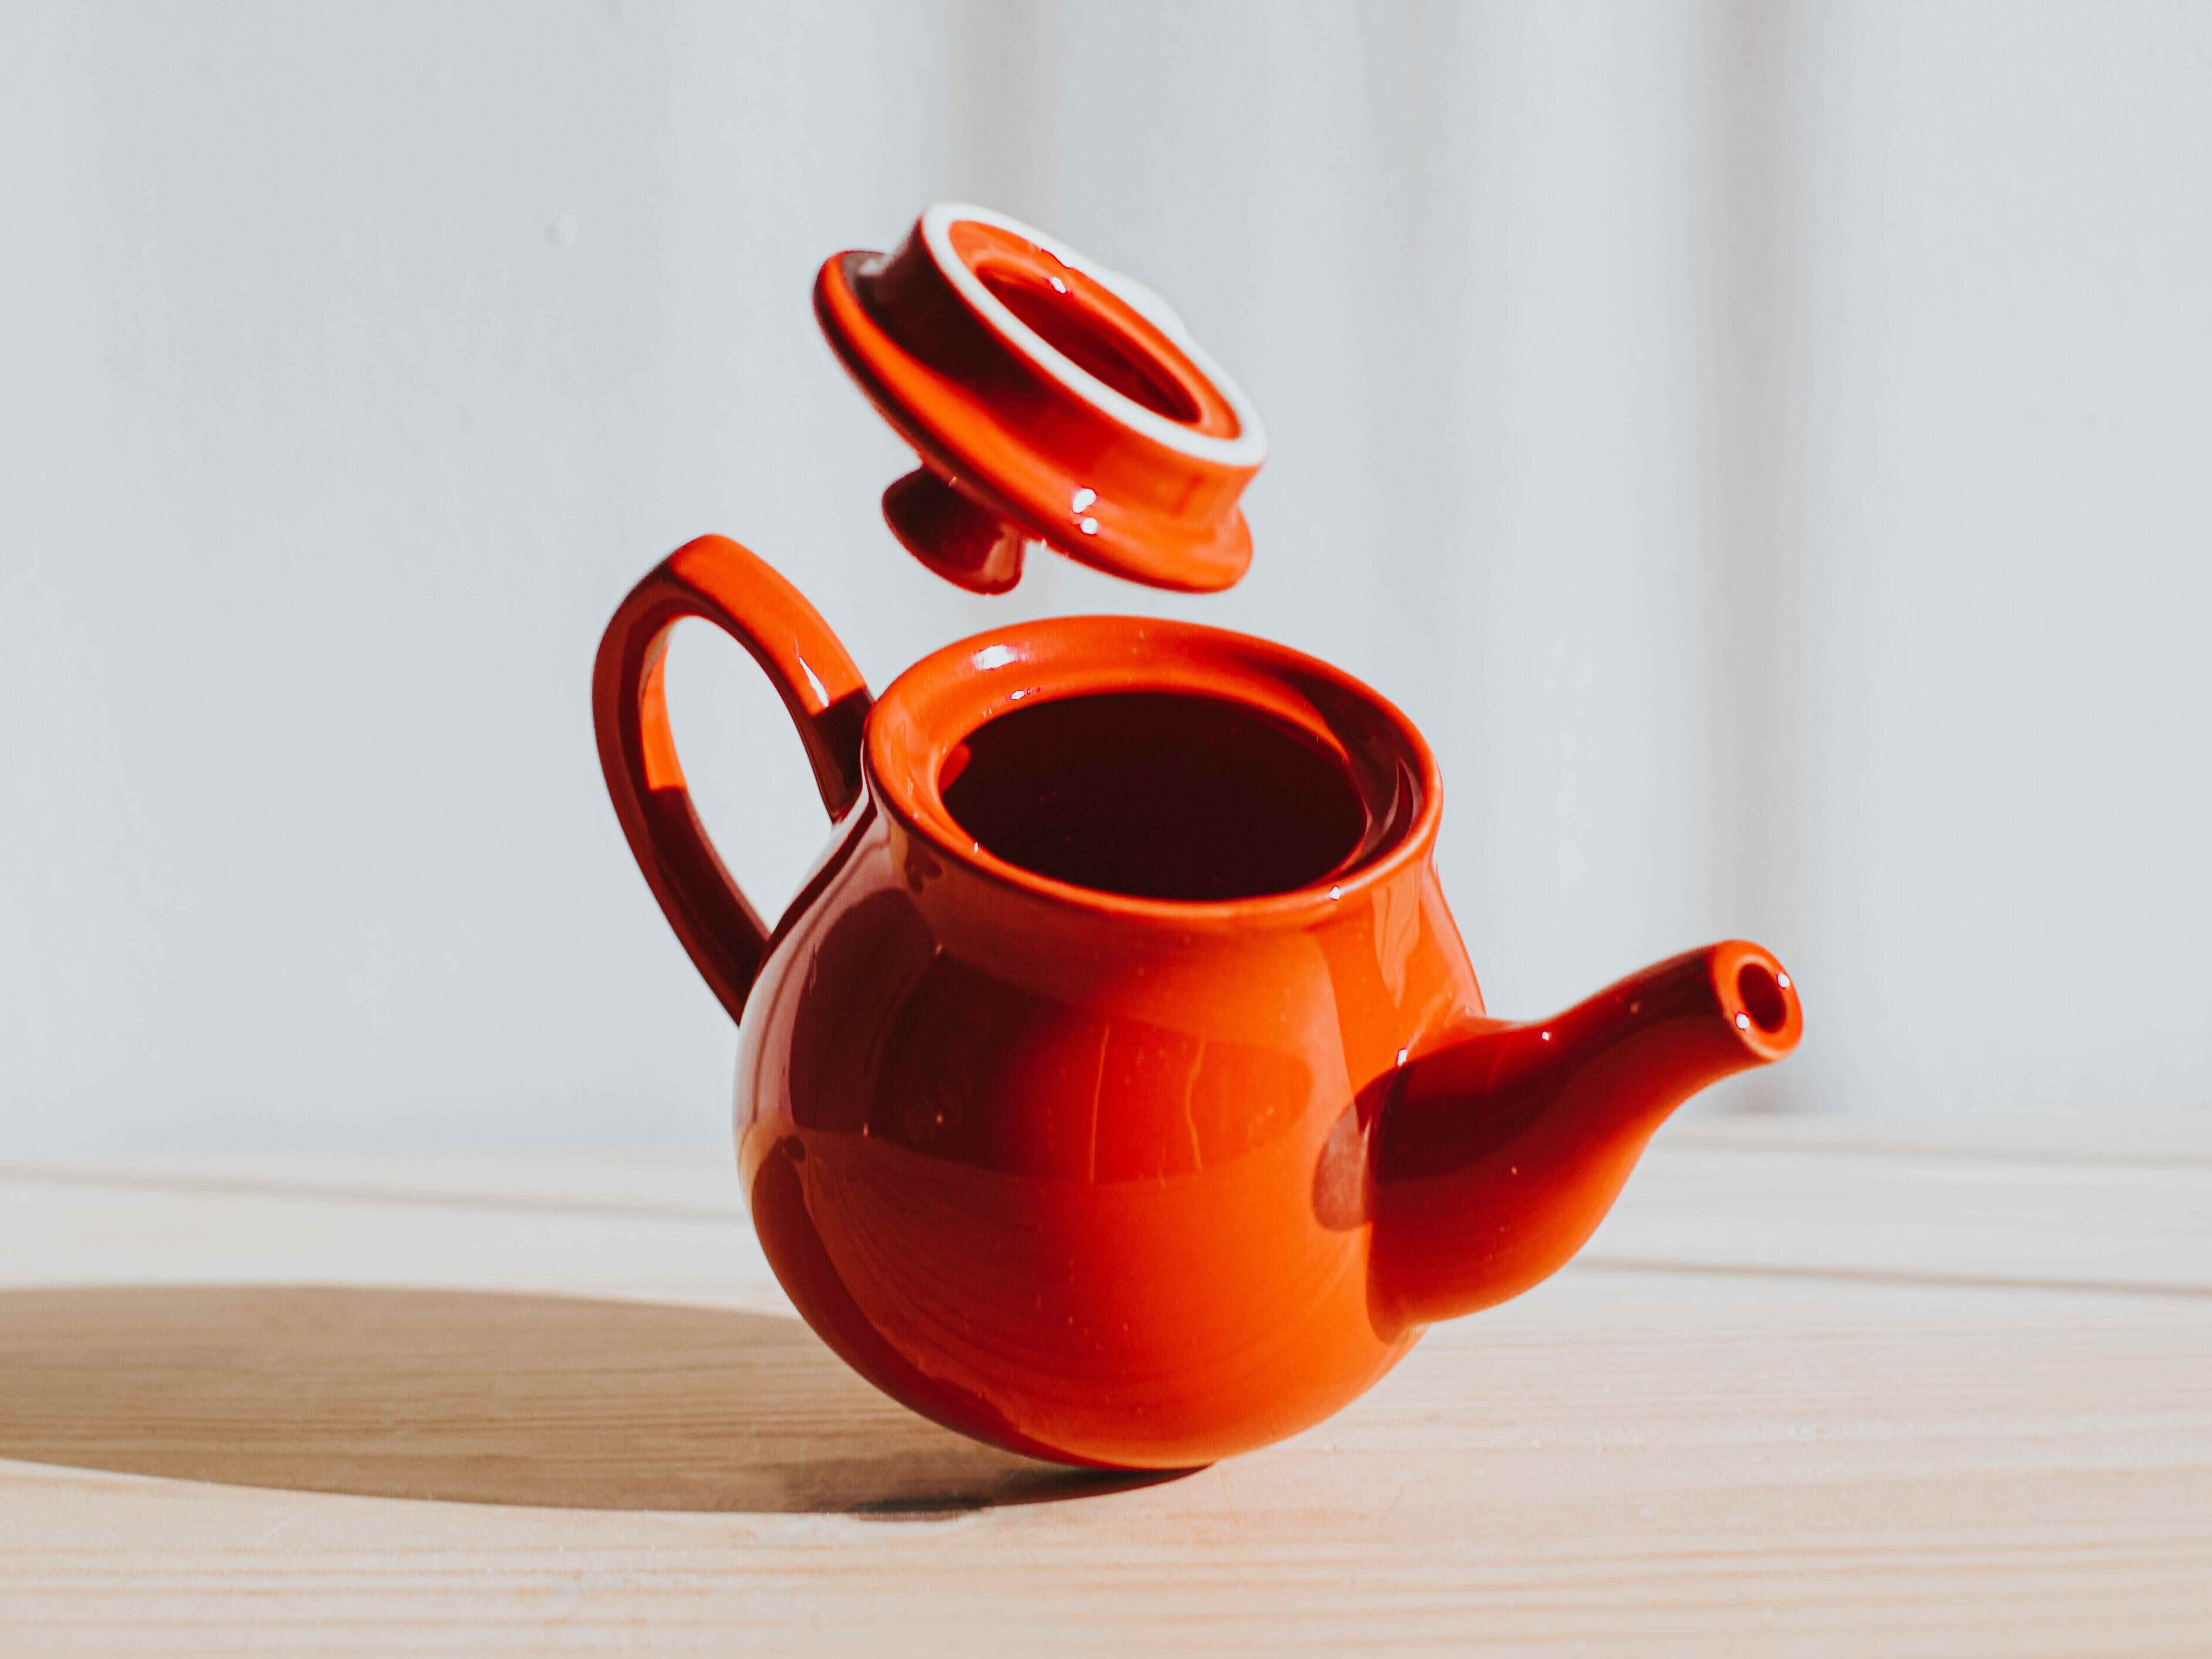 Teapot Review: A Stylish and Functional Choice for Her